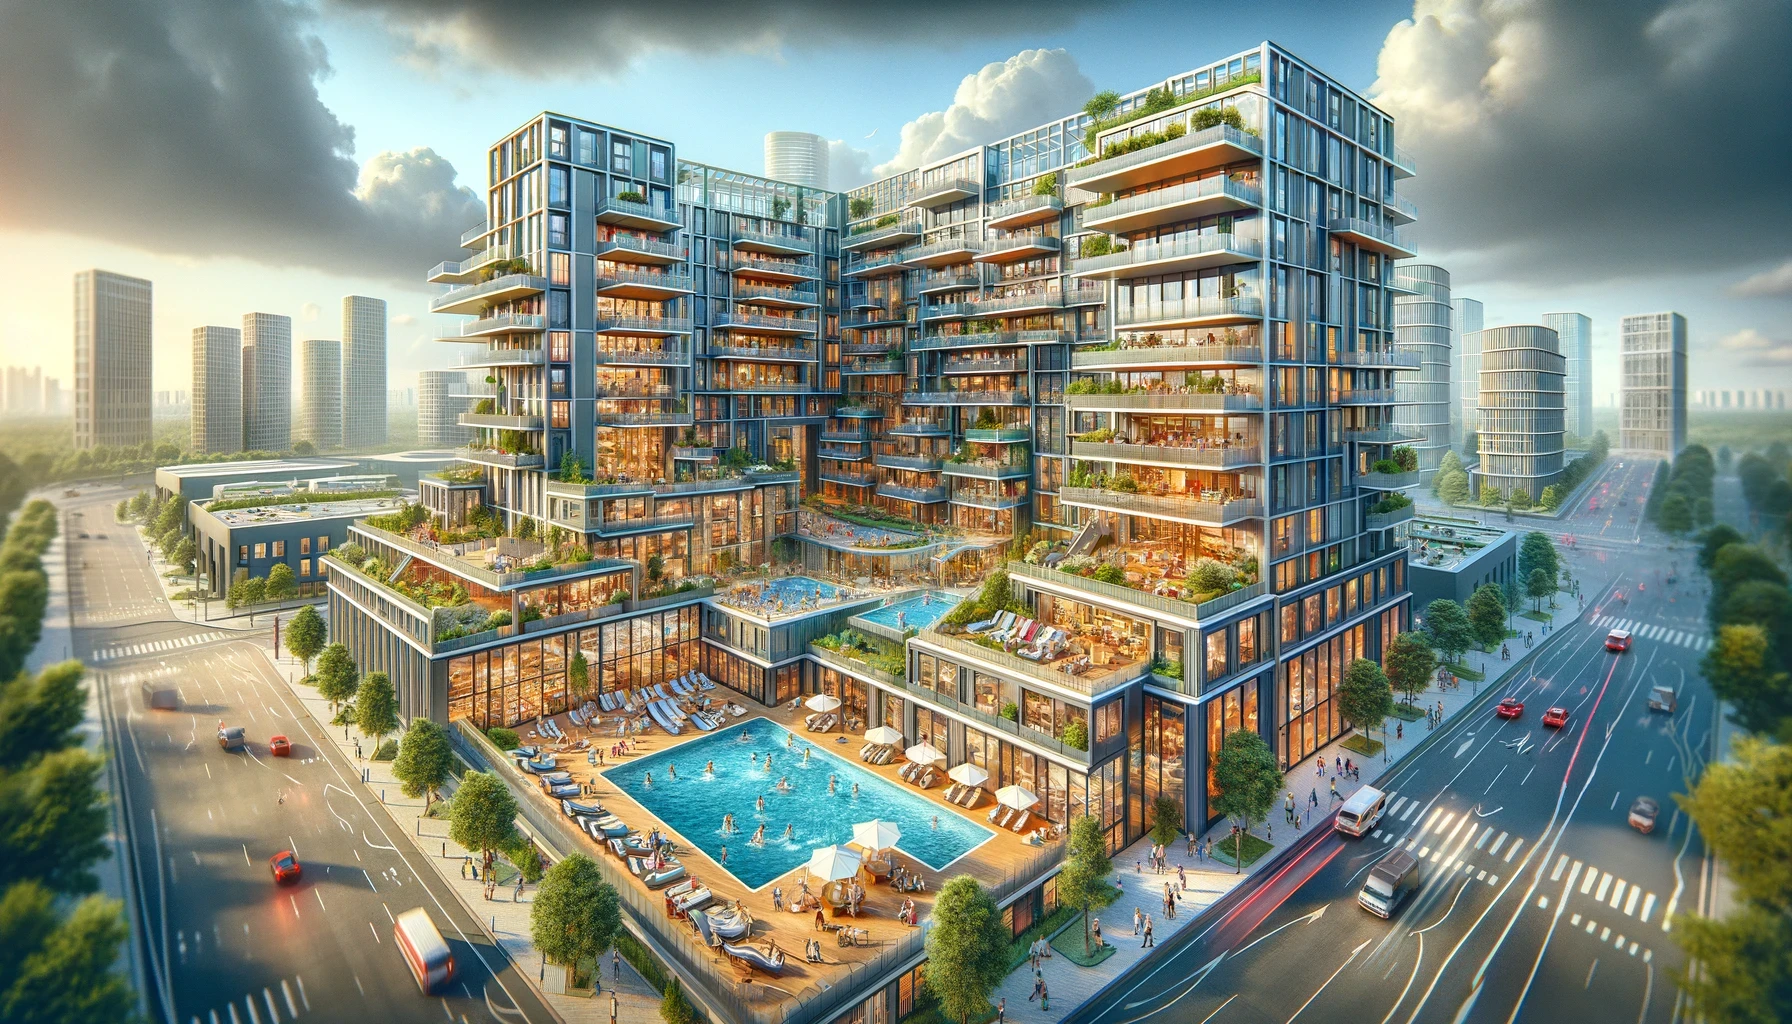 A wide-angle, detailed illustration of an ultra-modern luxury apartment complex in the city center, with the scene capturing the vibrant life and advanced facilities of the complex. Residents enjoy amenities like a swimming pool and a golf simulator, amidst communal lounges. The building is in a phase of expansion, with new modules being added to accommodate more residents. People are moving in, bringing a diverse array of furniture and personal items. The complex is bustling with activity, reflecting urban living's complexity and dynamism, without any cars or items on the road. The architecture blends modern design with functionality, showing an open-plan layout and seamless integration of living spaces with leisure amenities. This scene serves as a metaphor for cloud data warehousing's complexities and adaptive nature, highlighting themes of growth, integration, and resource management.